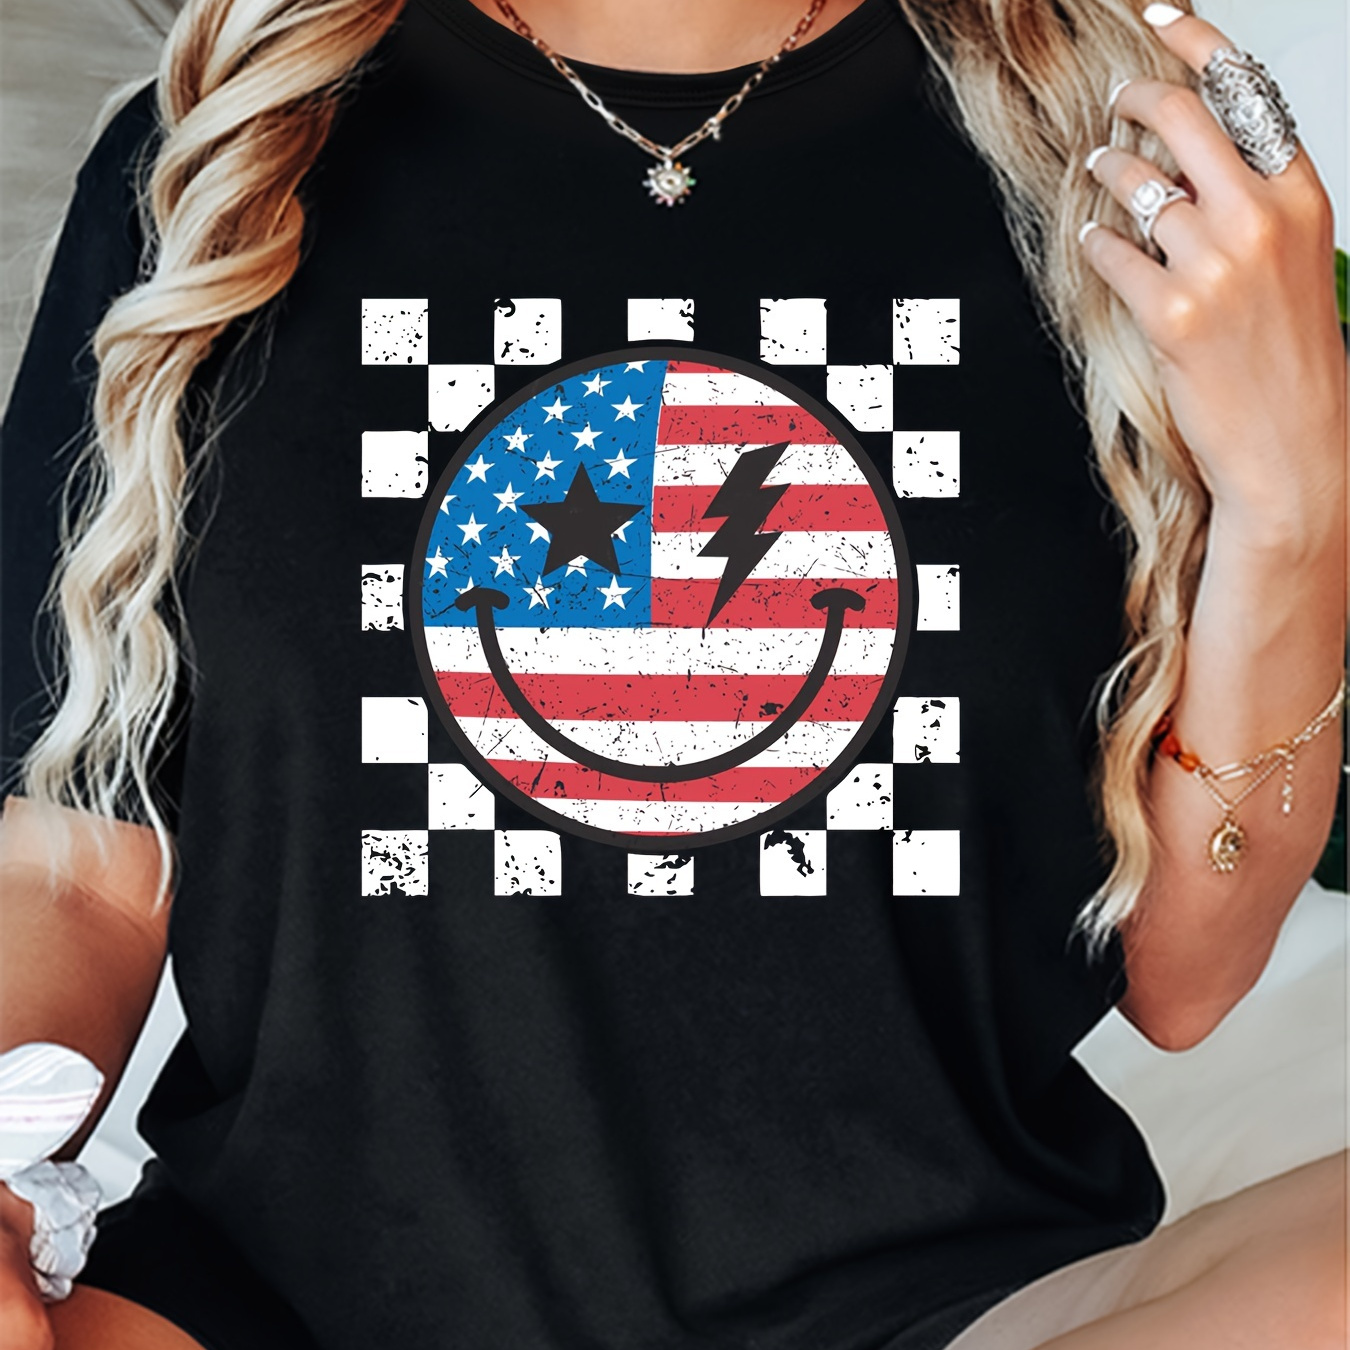 

Women's Casual Round Neck T-shirt, American Flag Checkerboard Smiling Face Print, Short Sleeve Tee For Spring & Summer, Sporty Everyday Top